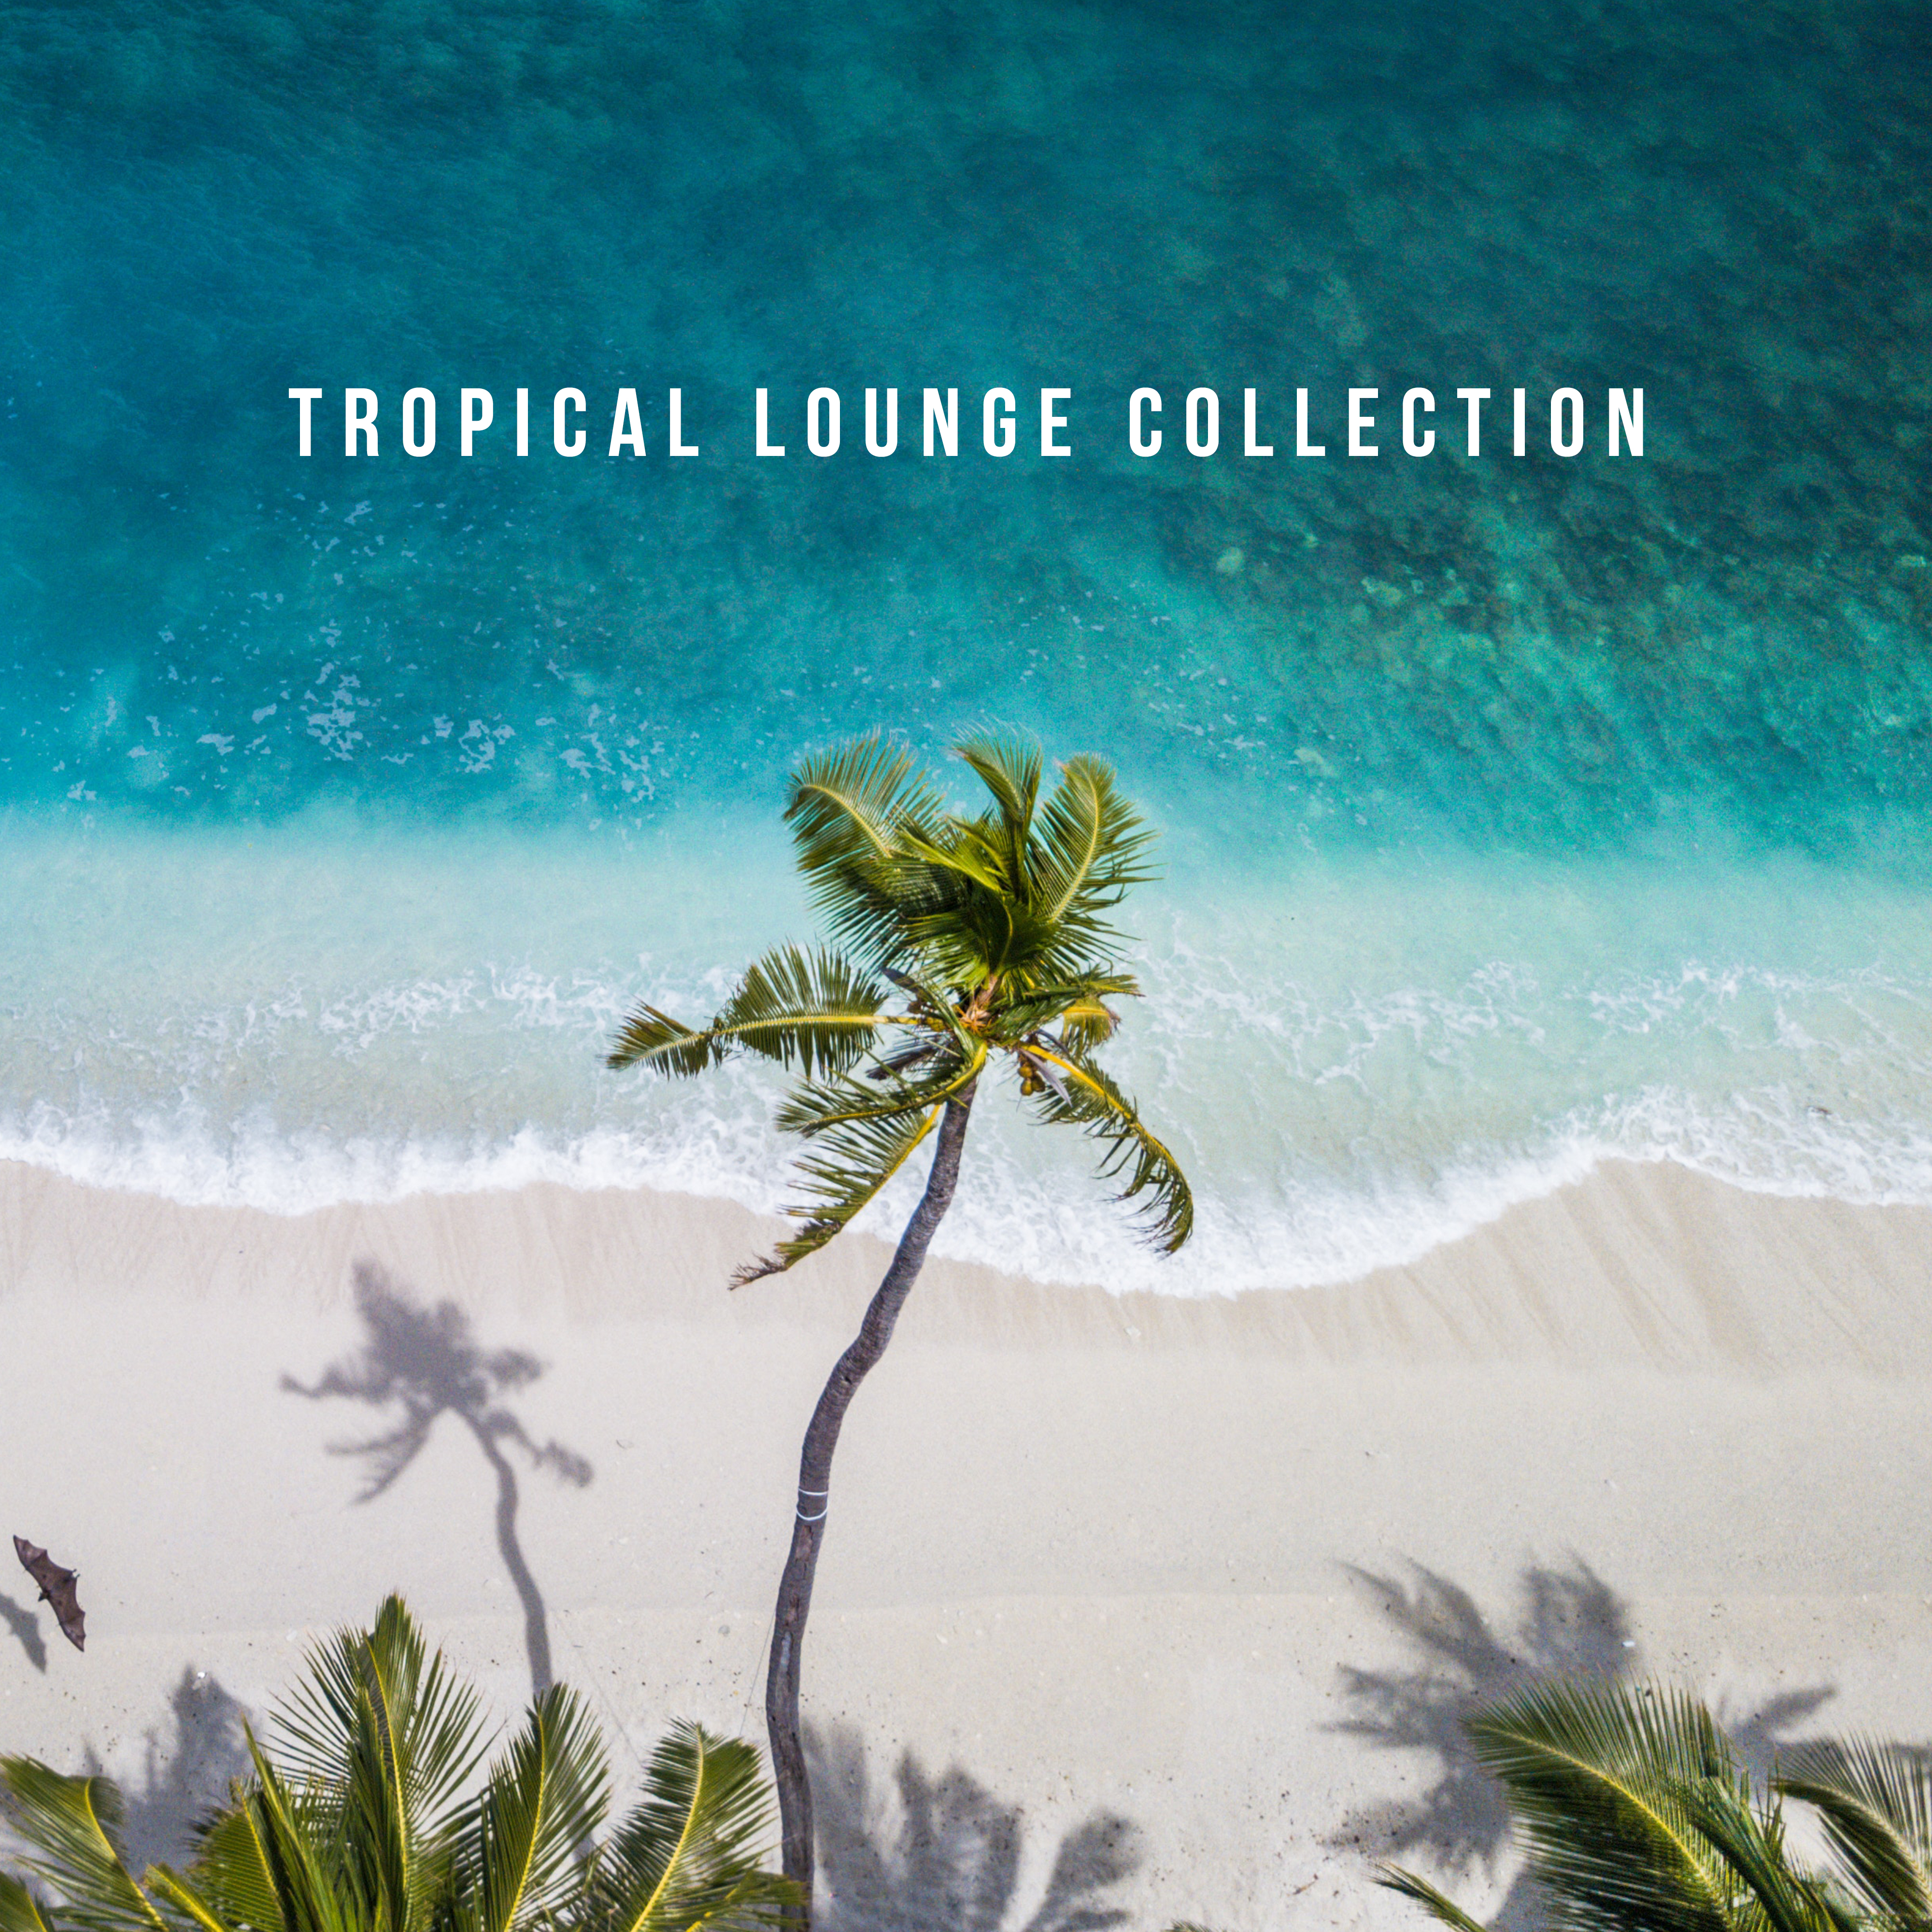 Tropical Lounge Collection  Sunny Chillout, Relaxing Beats, Pure Relaxation, Beach Music, Zero Stress, Chill Zone Music